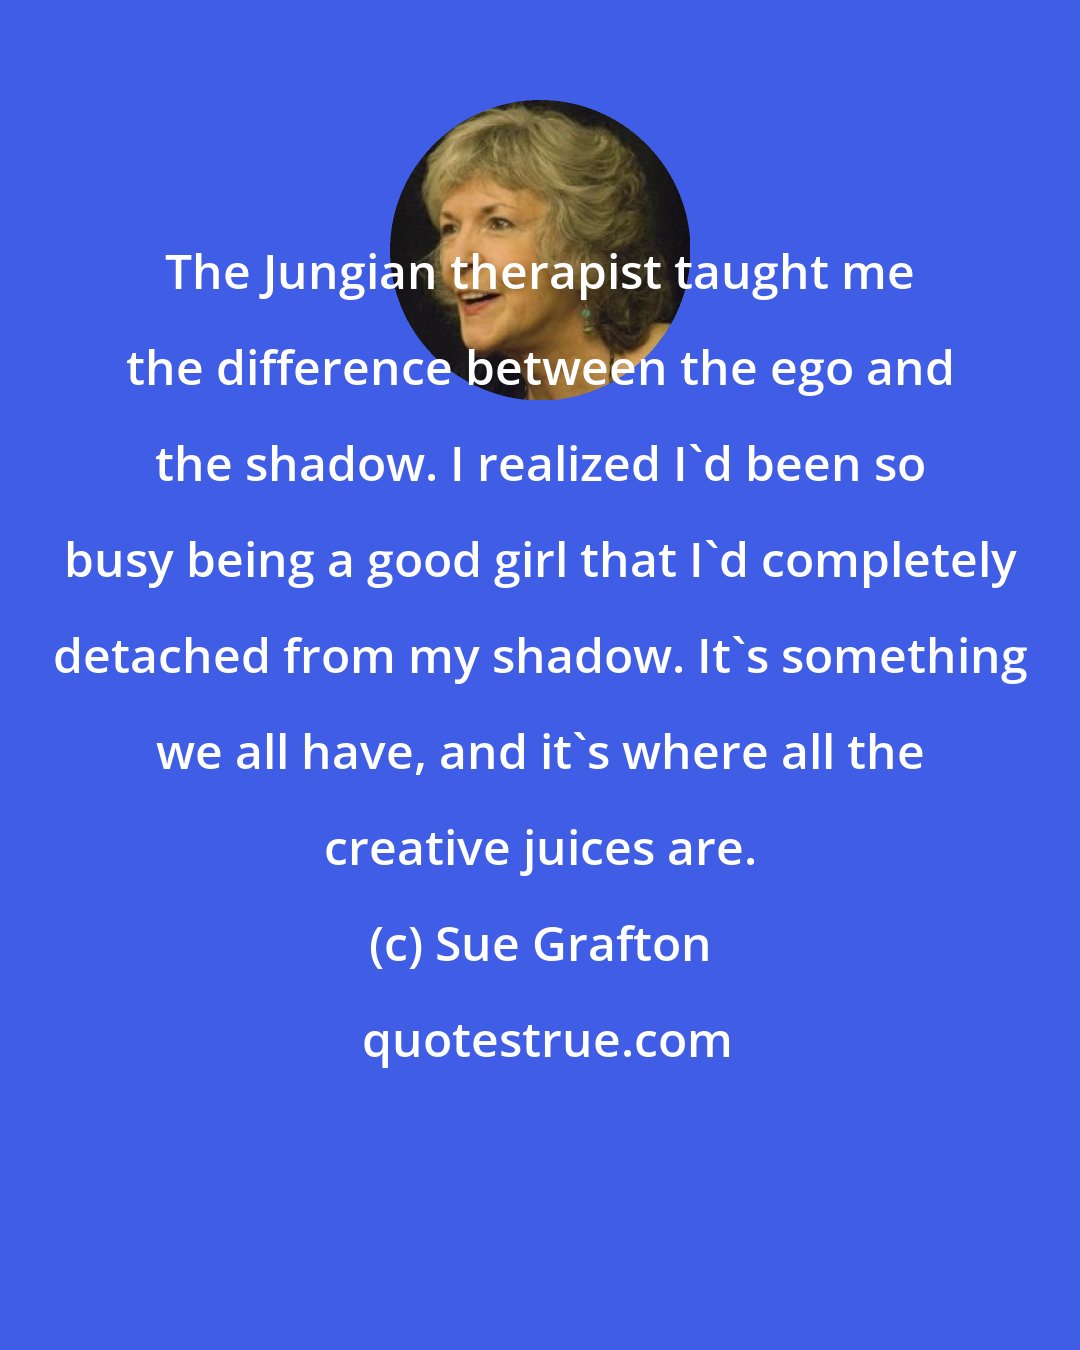 Sue Grafton: The Jungian therapist taught me the difference between the ego and the shadow. I realized I'd been so busy being a good girl that I'd completely detached from my shadow. It's something we all have, and it's where all the creative juices are.